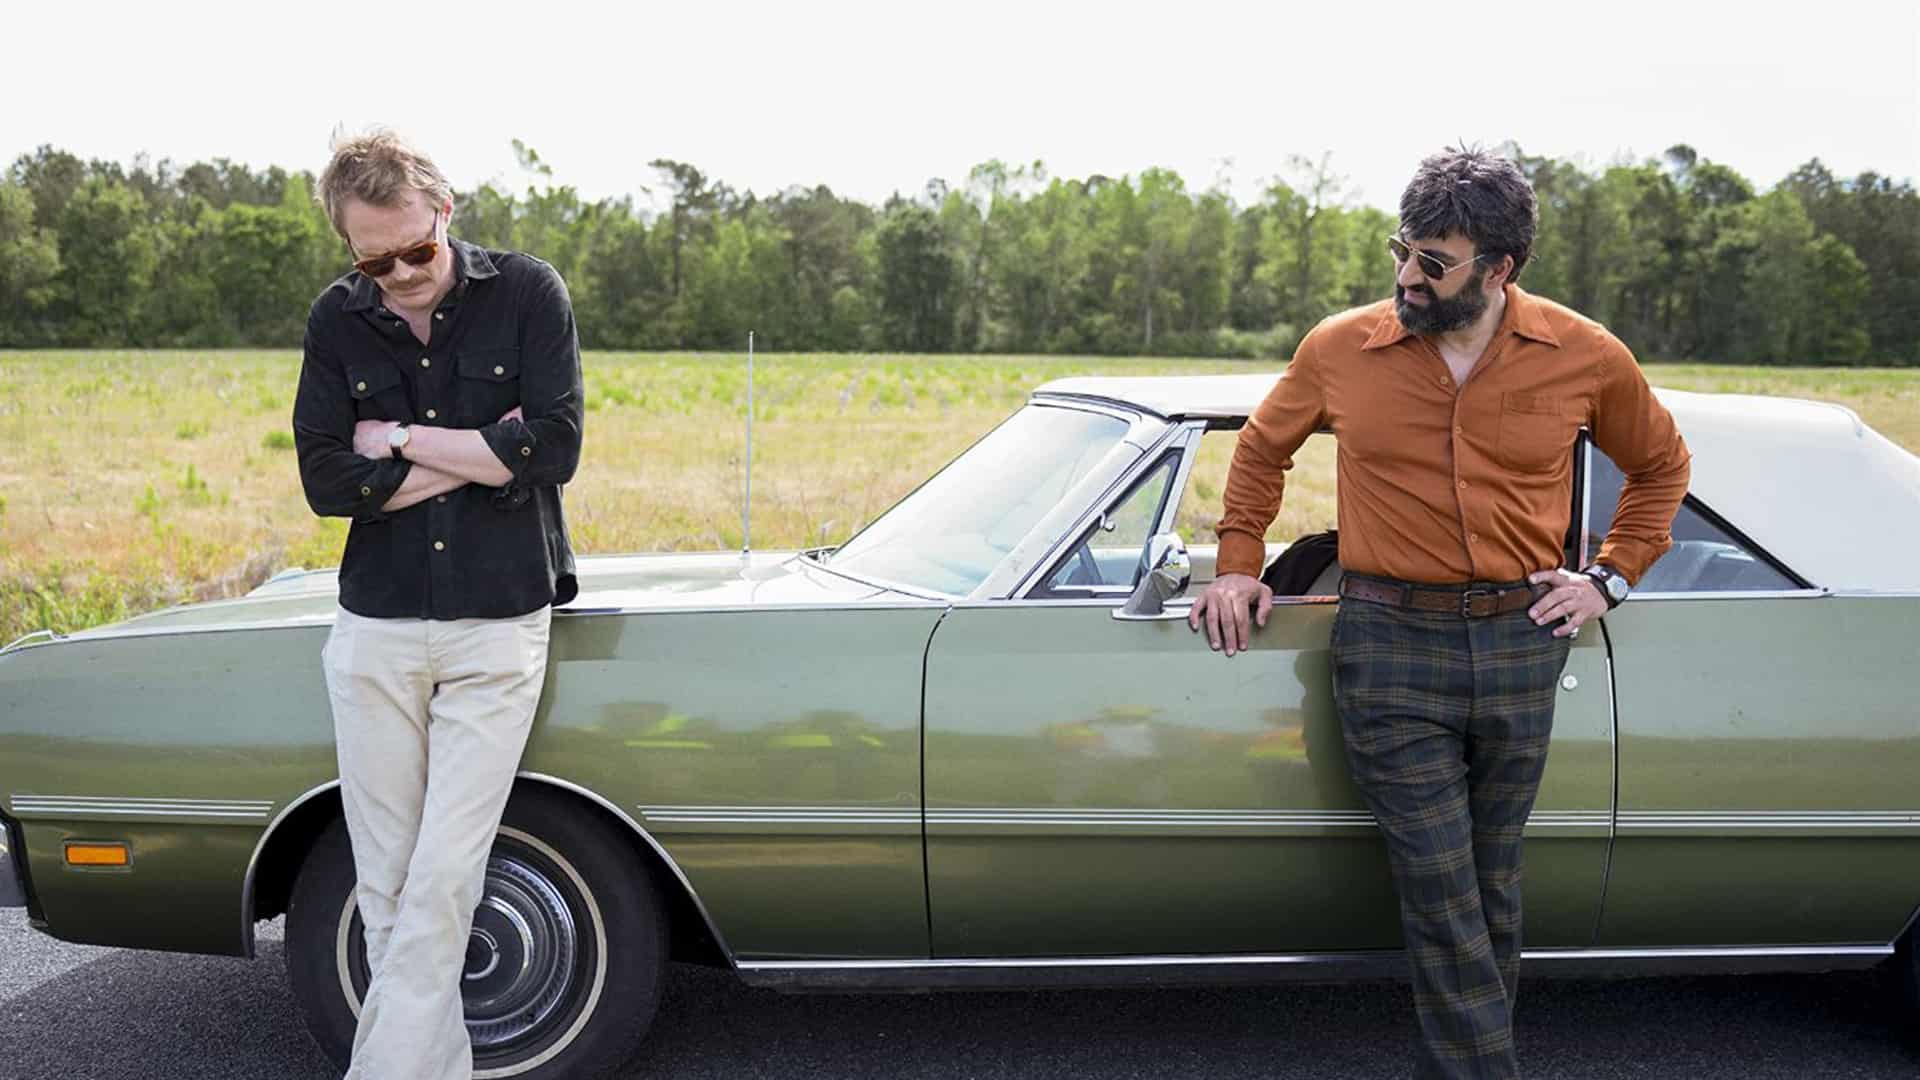 Frank and Wally lean against a car in this image from Amazon Studios